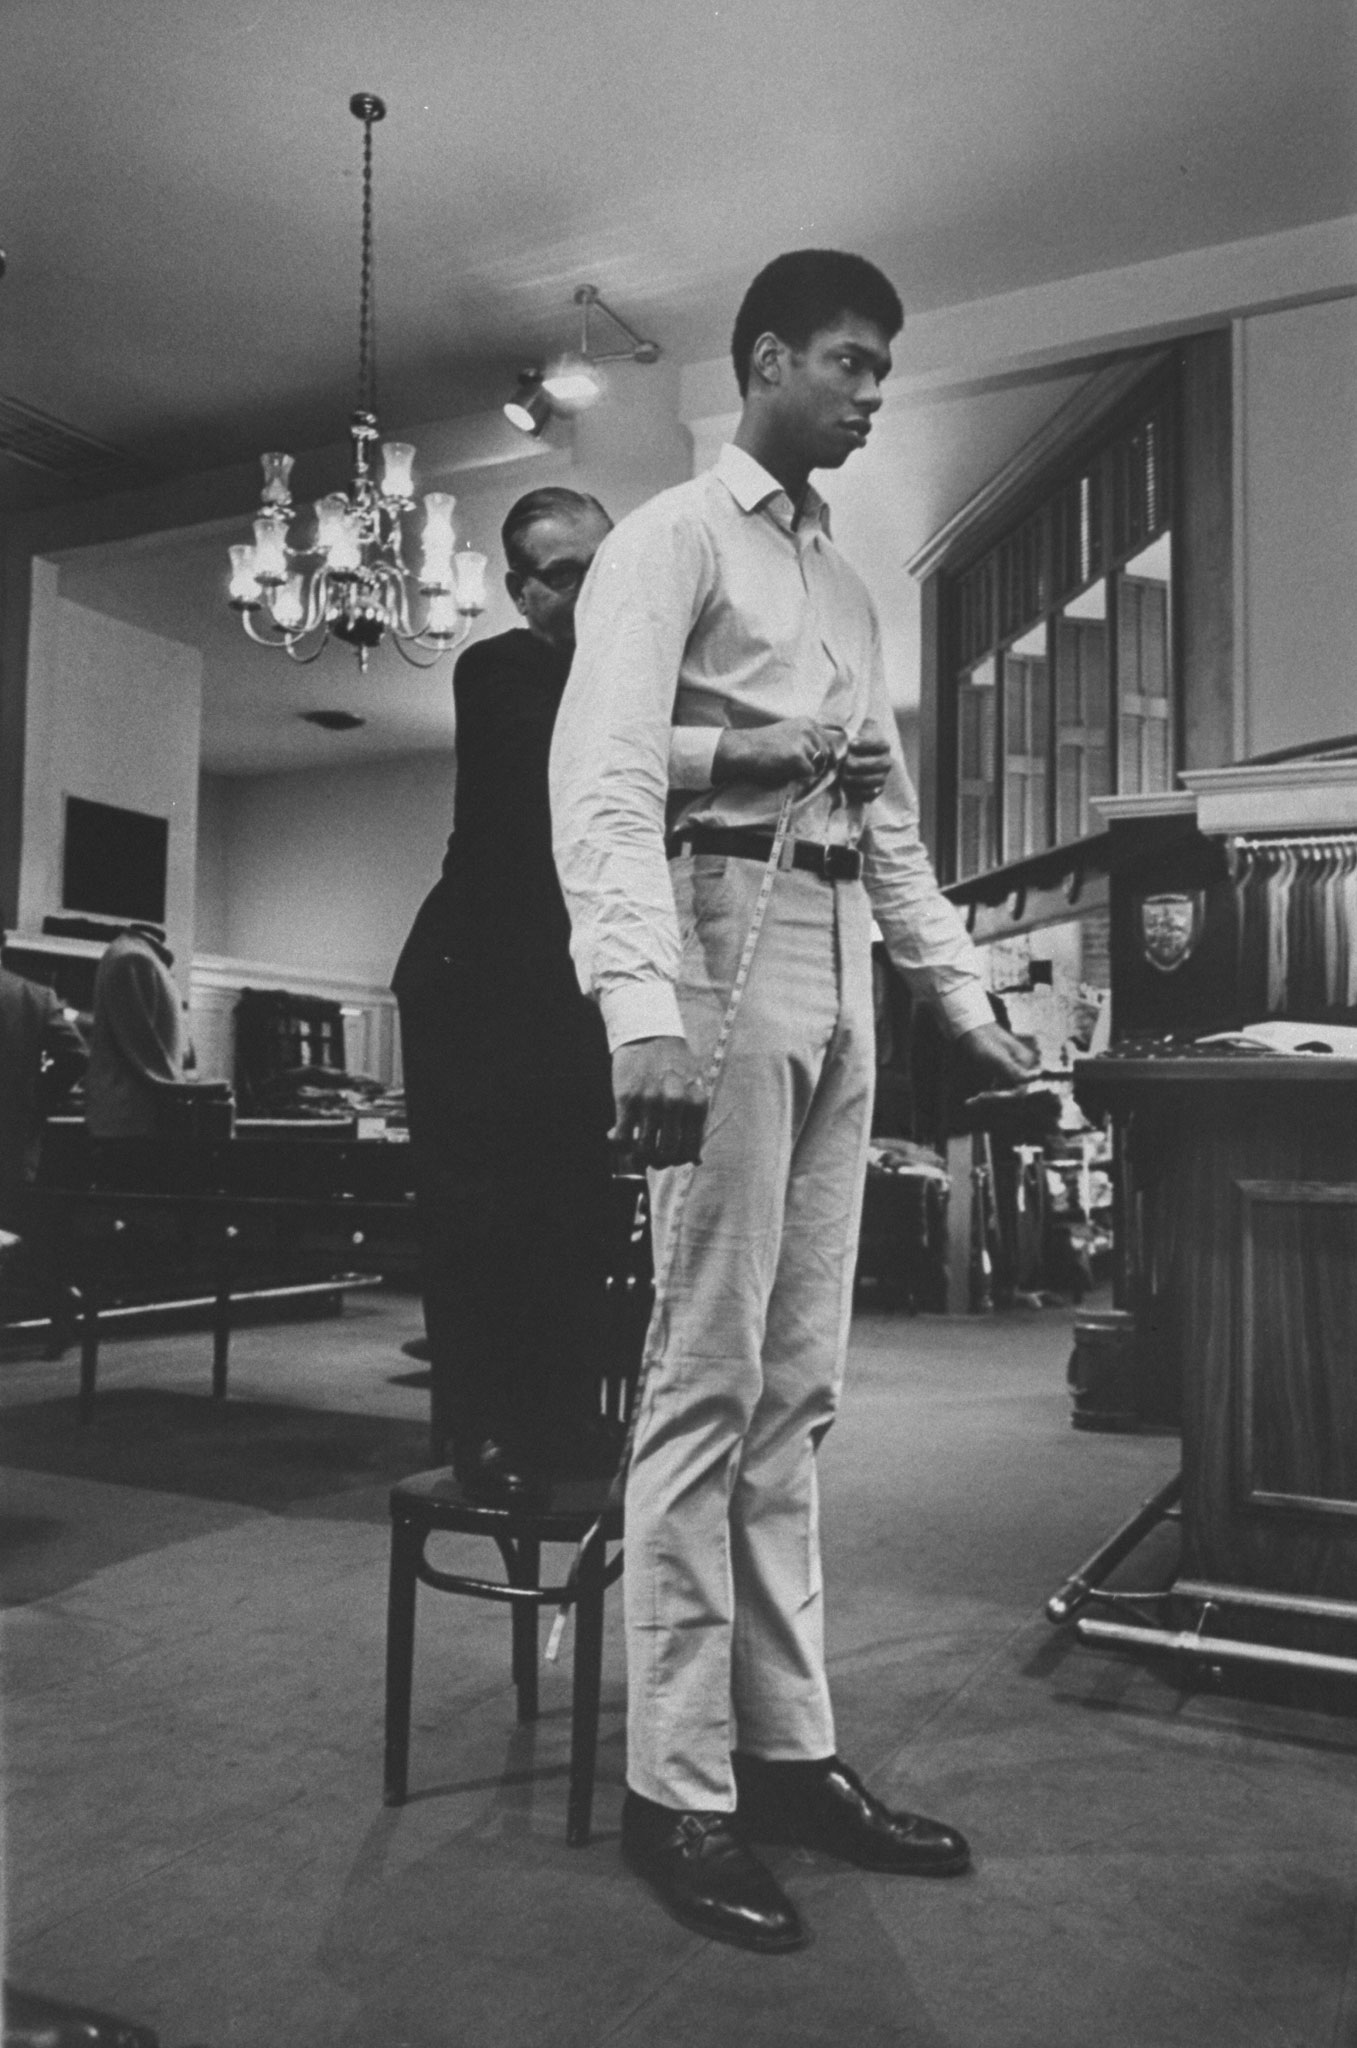 Seven-foot, two-inch Lew Alcindor (later Kareem Abdul-Jabbar, here being fitted for trousers with a 51-inch inseam in 1967) left his native New York for UCLA, where he helped the Bruins win a record 88 games in a row and three national titles.